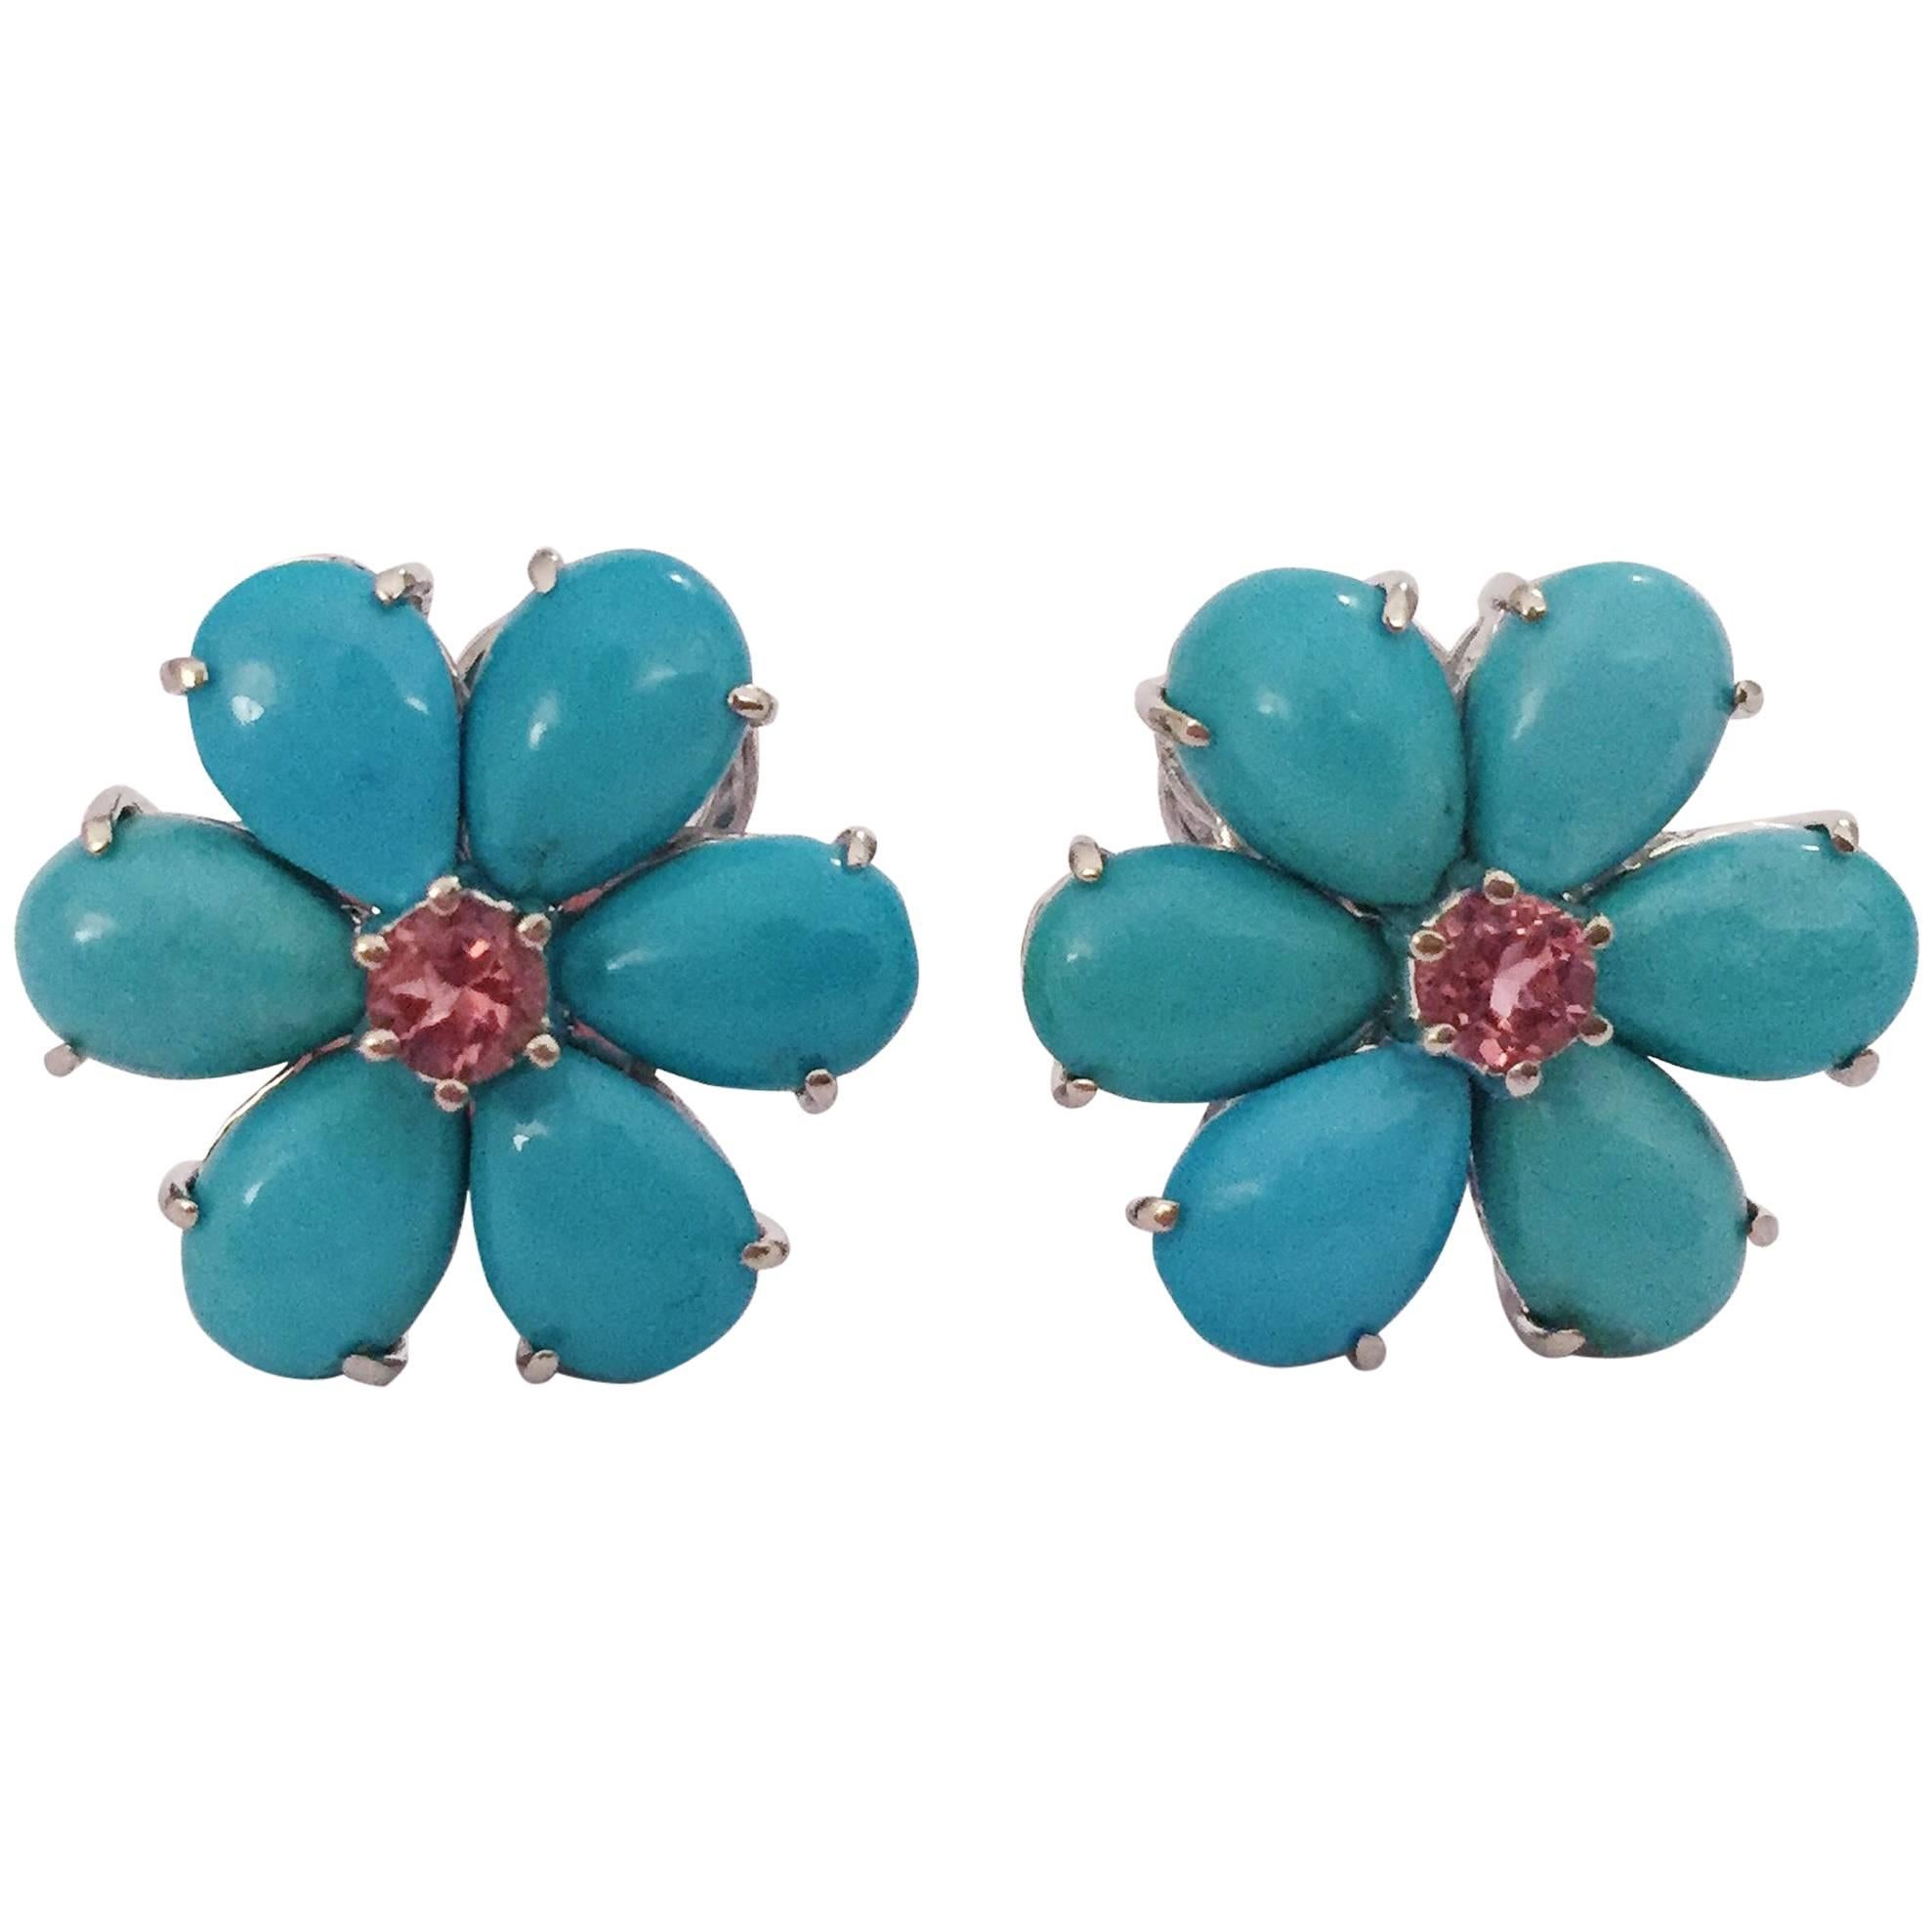 Christina Addison 18kt White Gold Turquoise Flower Earring with 12 Pear shaped print set Turquoise surrounding a print set Faceted Rubellite Center.

The earrings measure 3/4